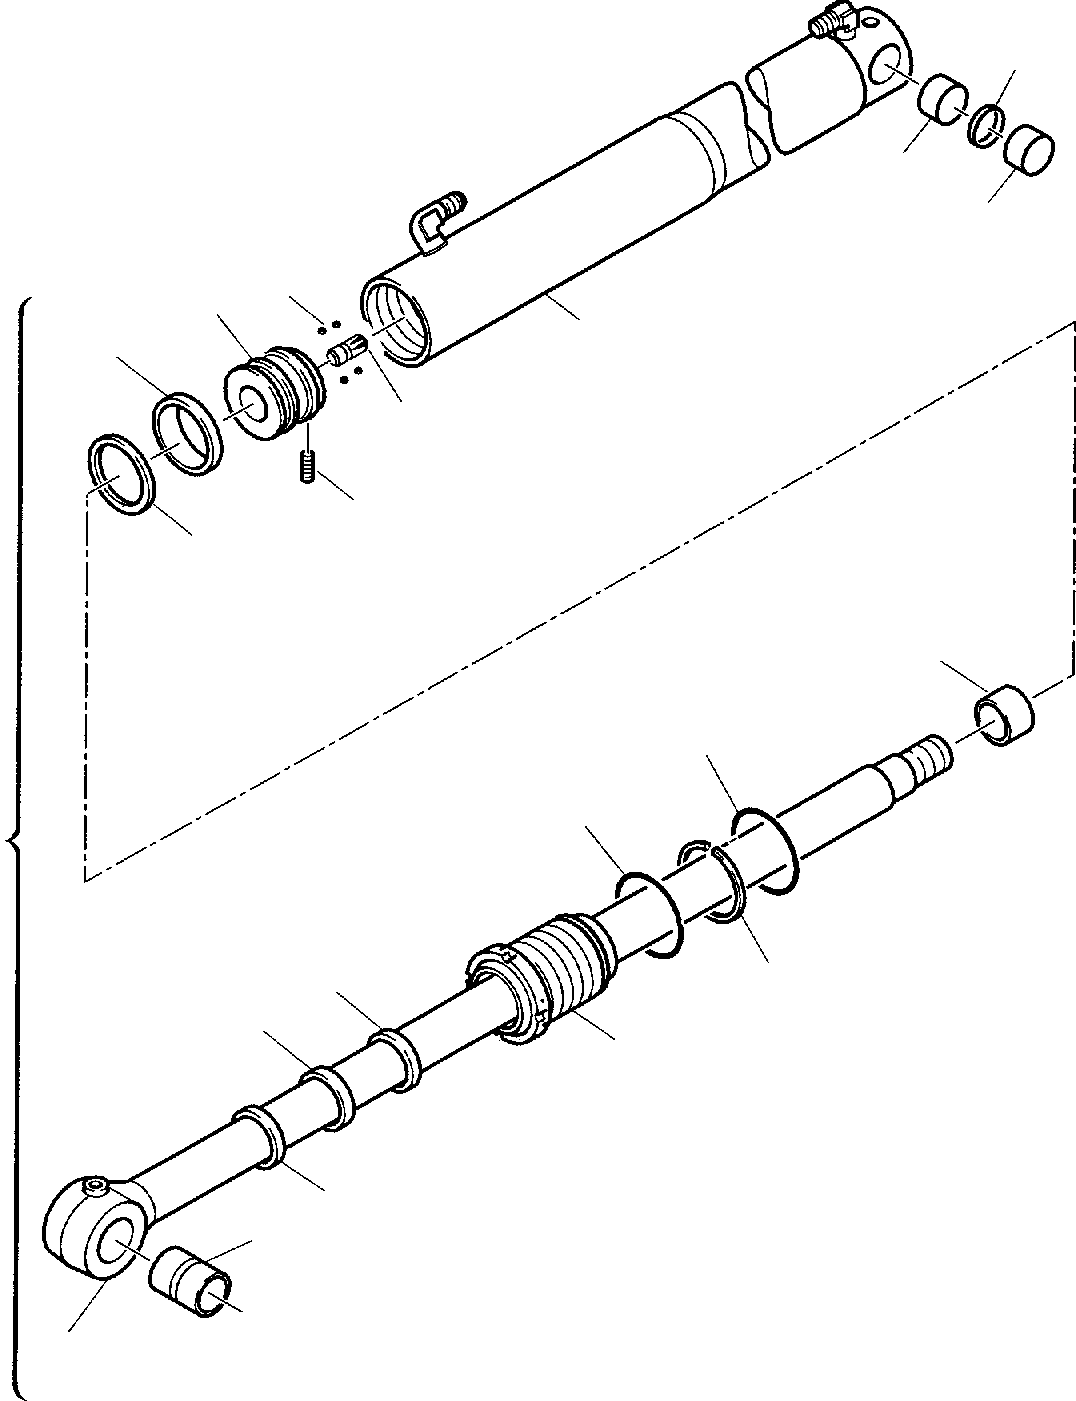 Part 58. HORIZONTAL OUTRIGGER CYLINDER R.H. [6790]